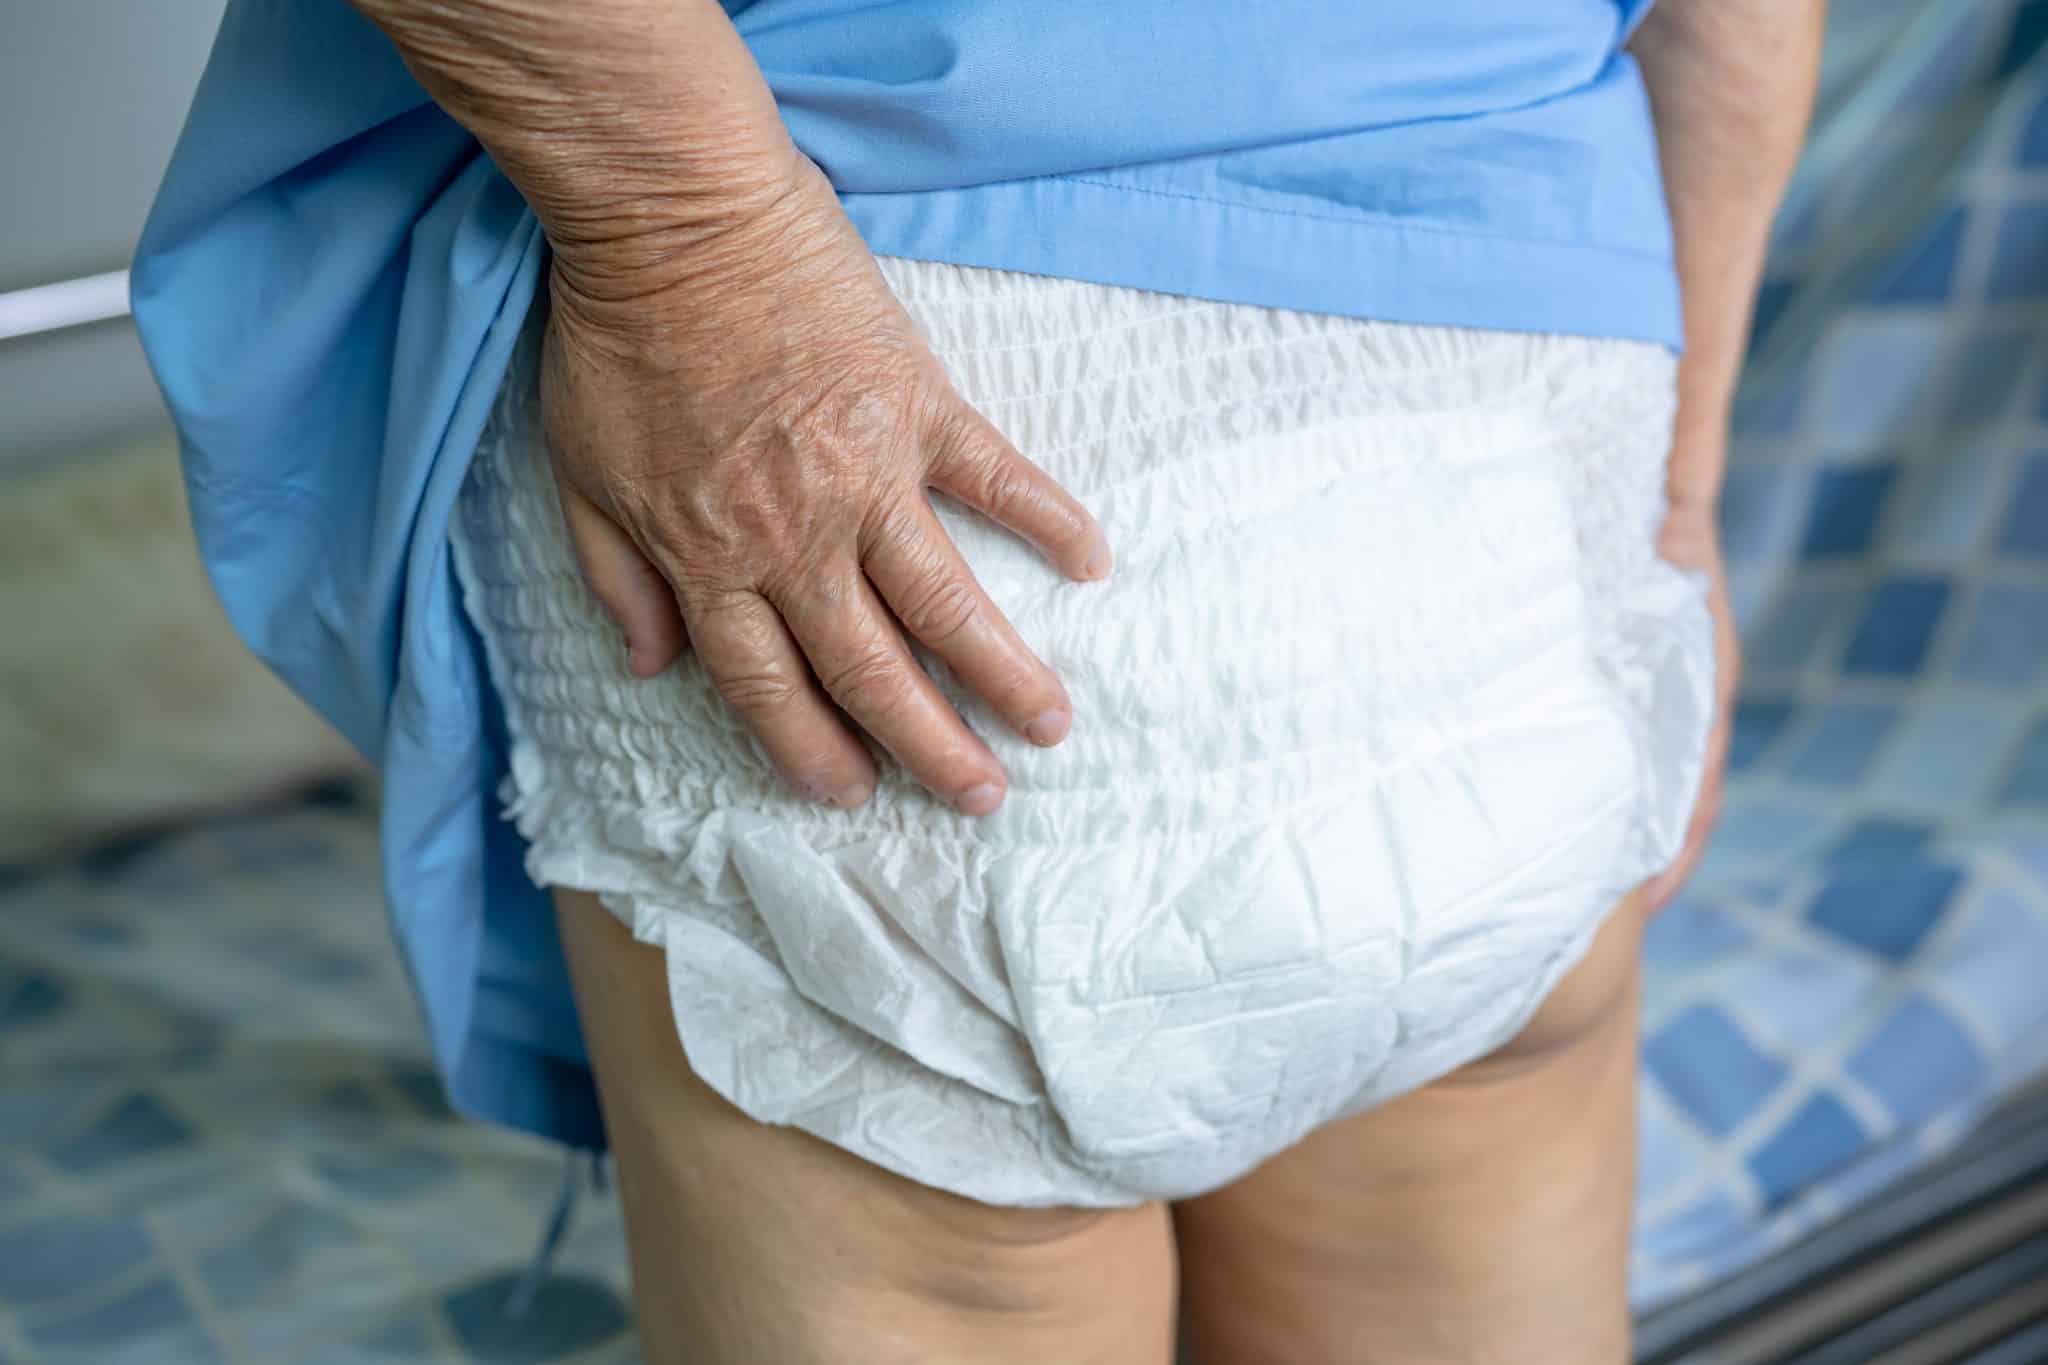 Life Without Limits How Adult Incontinence Pants Make a Difference